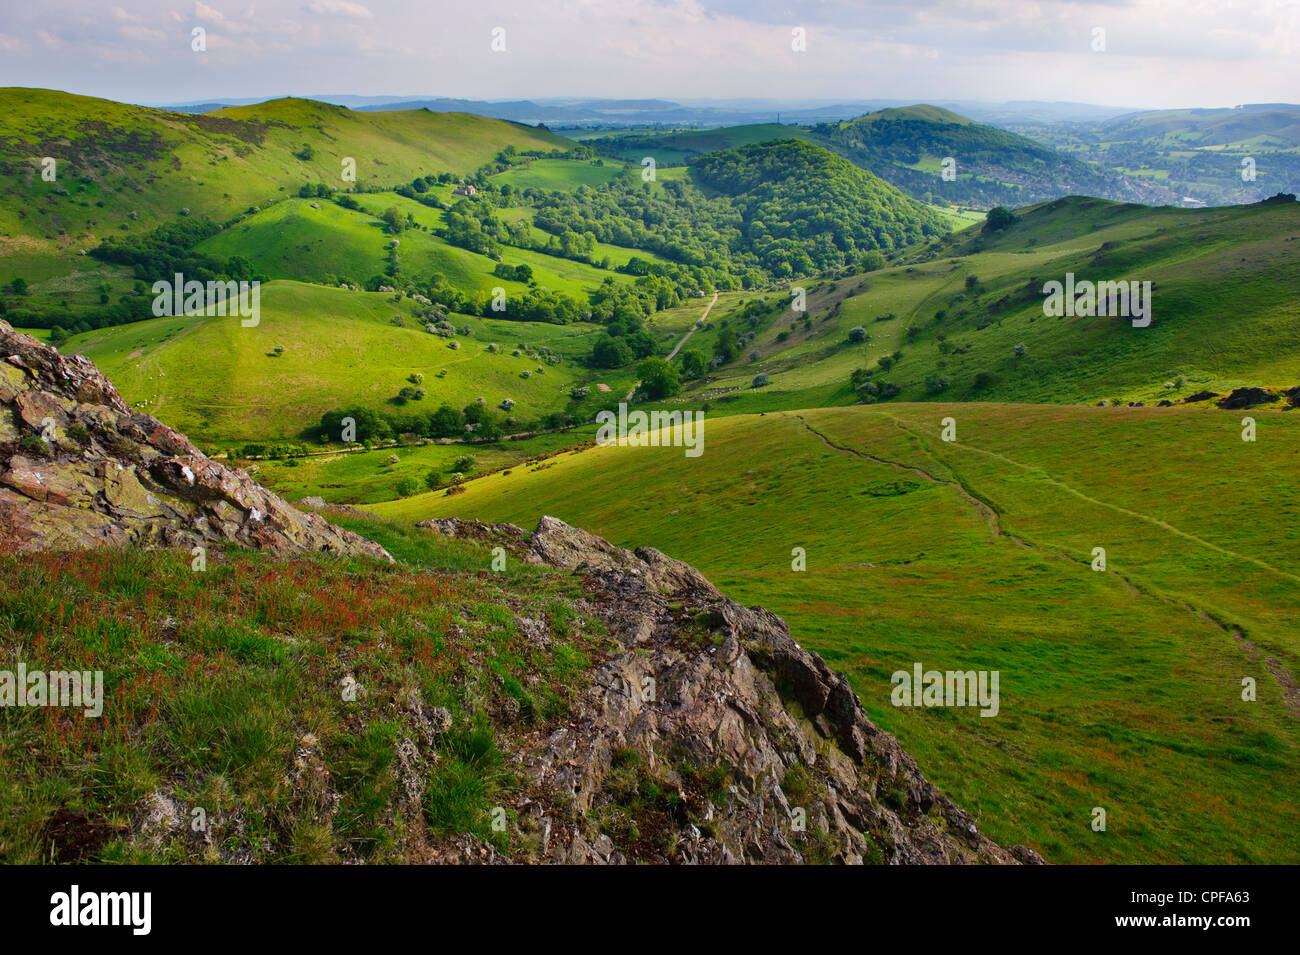 High on the ridge of Caer Caradoc, Shropshire, England, looking towards Hope Bowdler Hill with Wenlock Edge in the distance Stock Photo